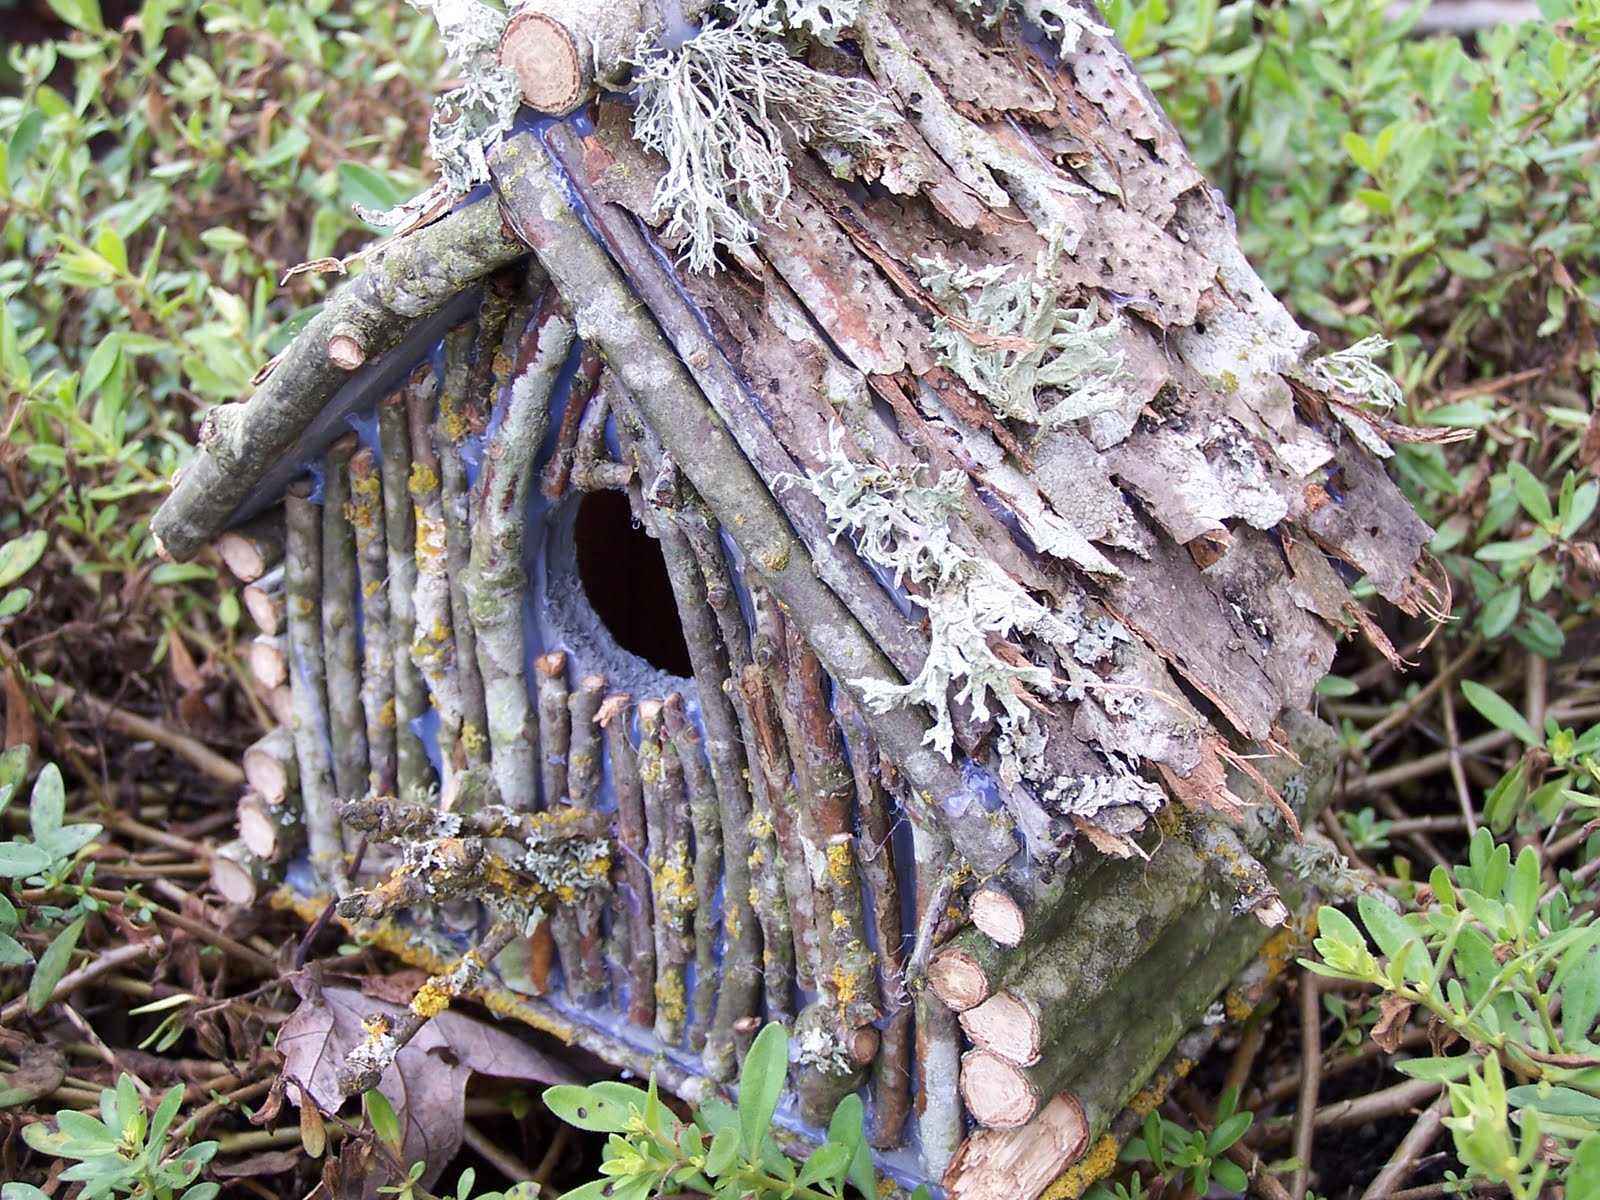 At first I really wanted to make my own birdhouse from scratch from twigs b...